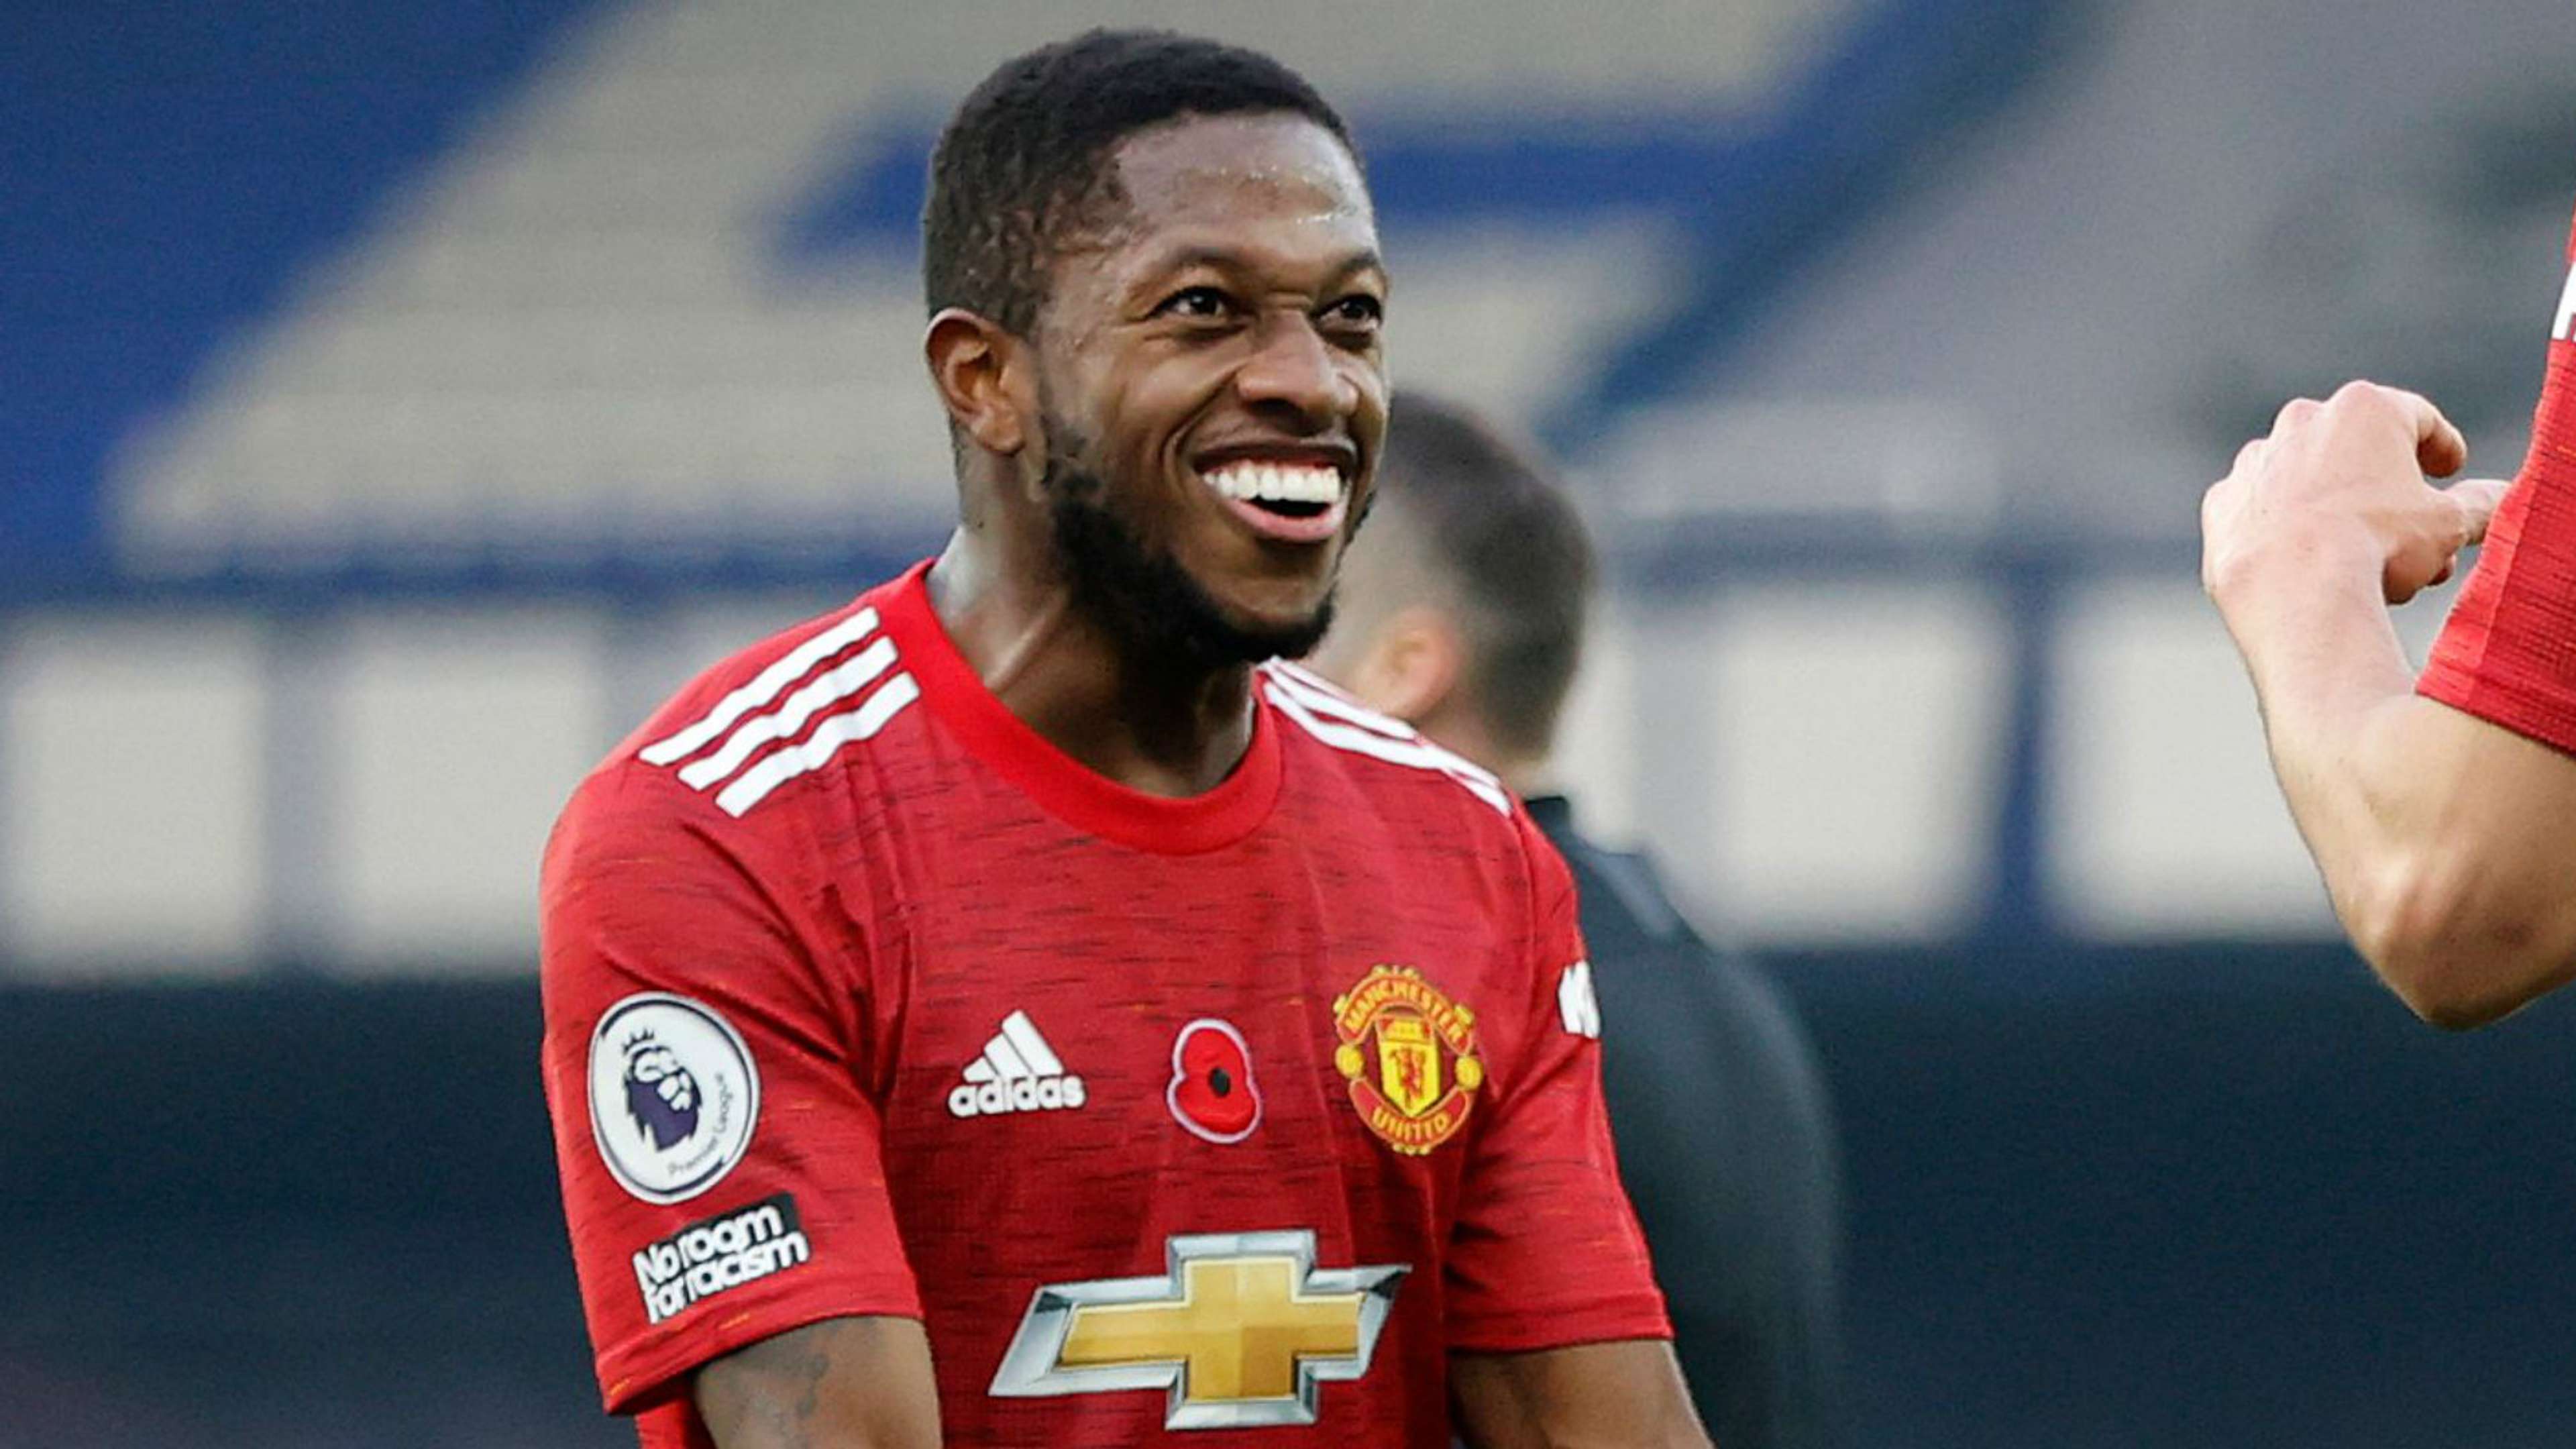 Fred Manchester United 2020-21